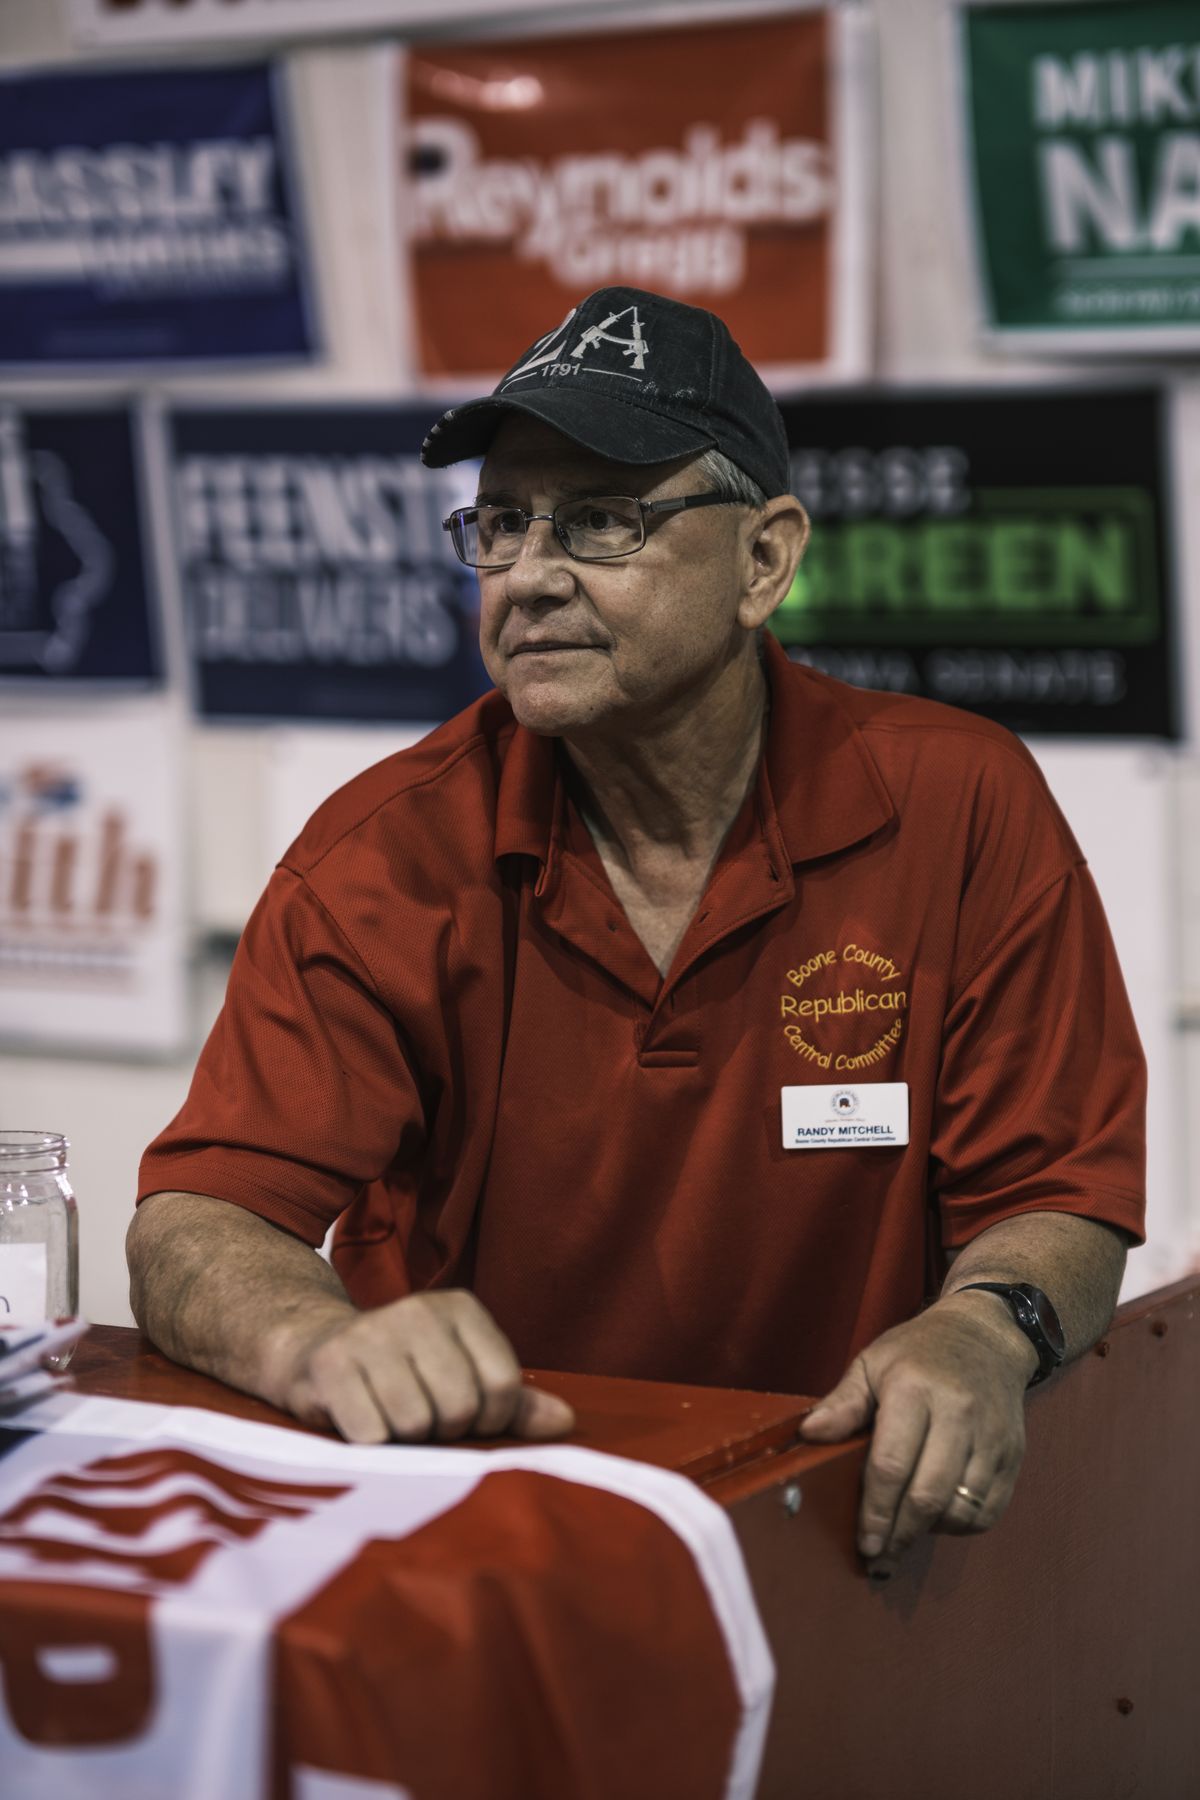 Randy Mitchel volunteers at the Boone County Republican Party